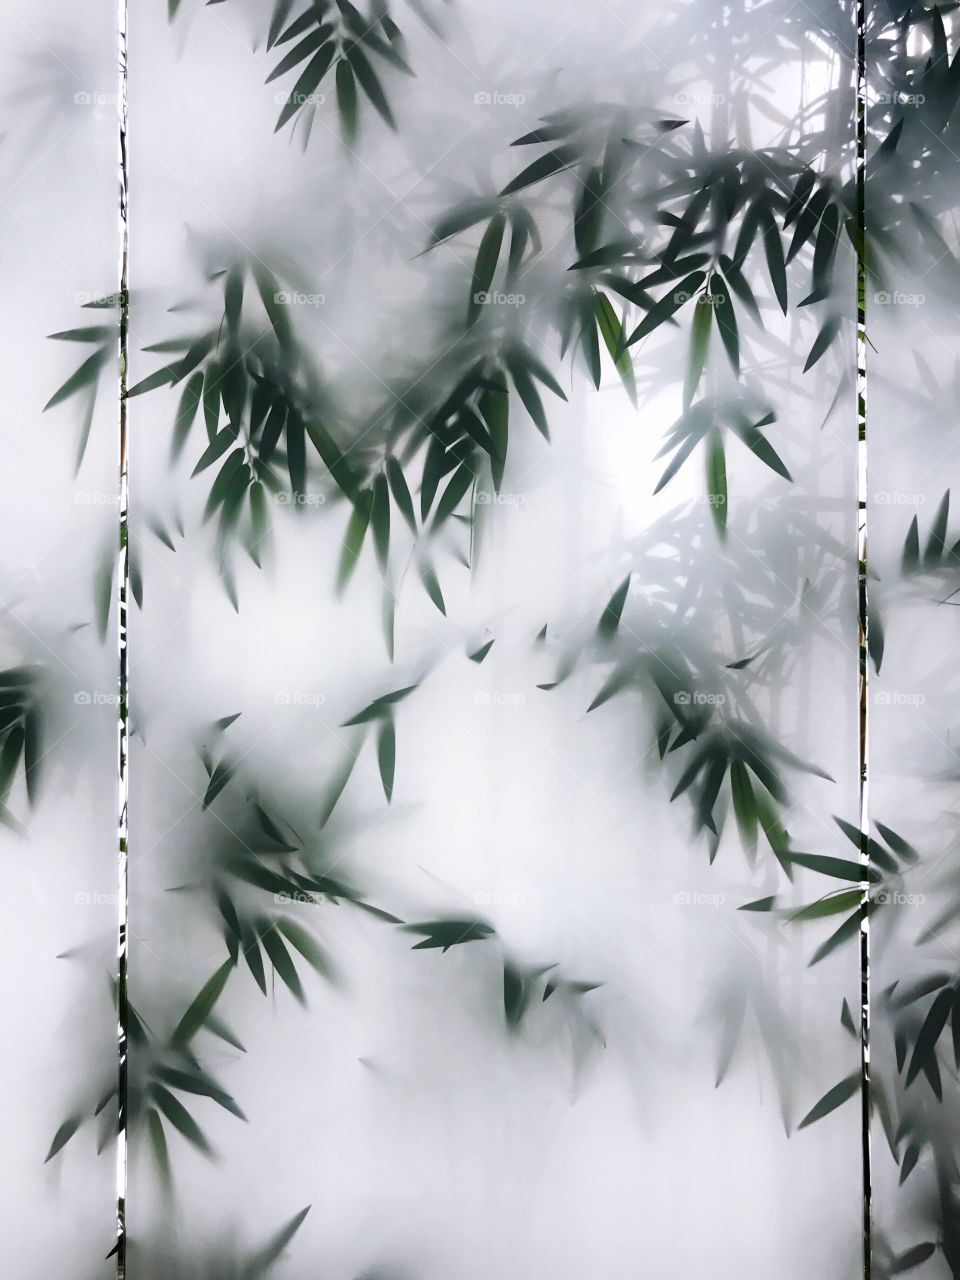 Bamboo leaves in foggy weather